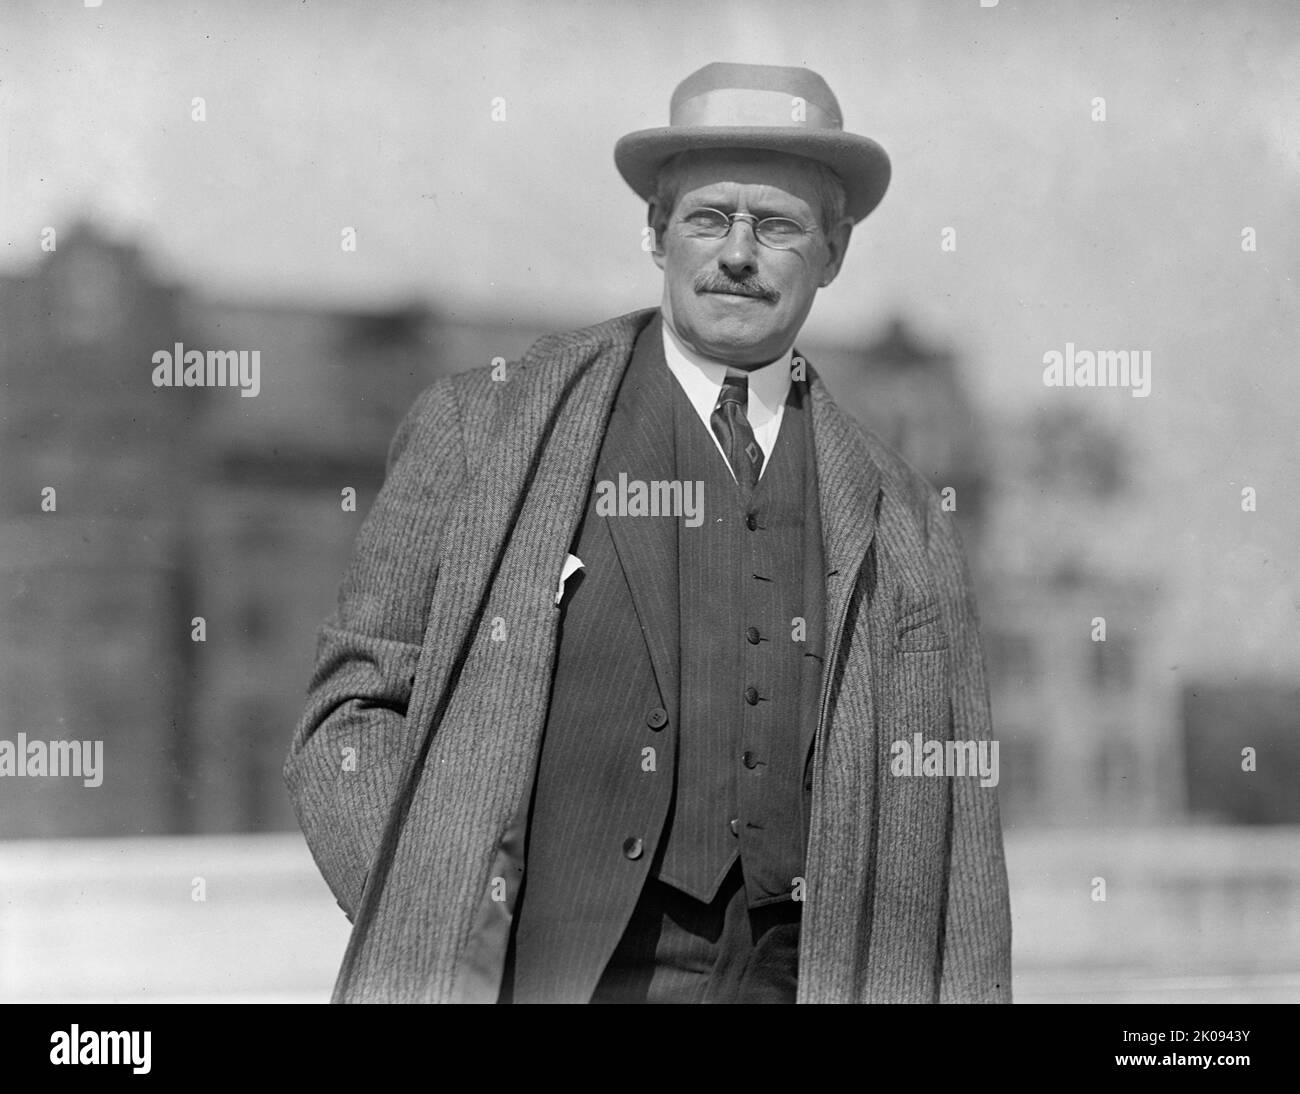 Clapp Hearings - William Flinn of Pittsburgh, 1912. [US politician and construction magnate]. Stock Photo